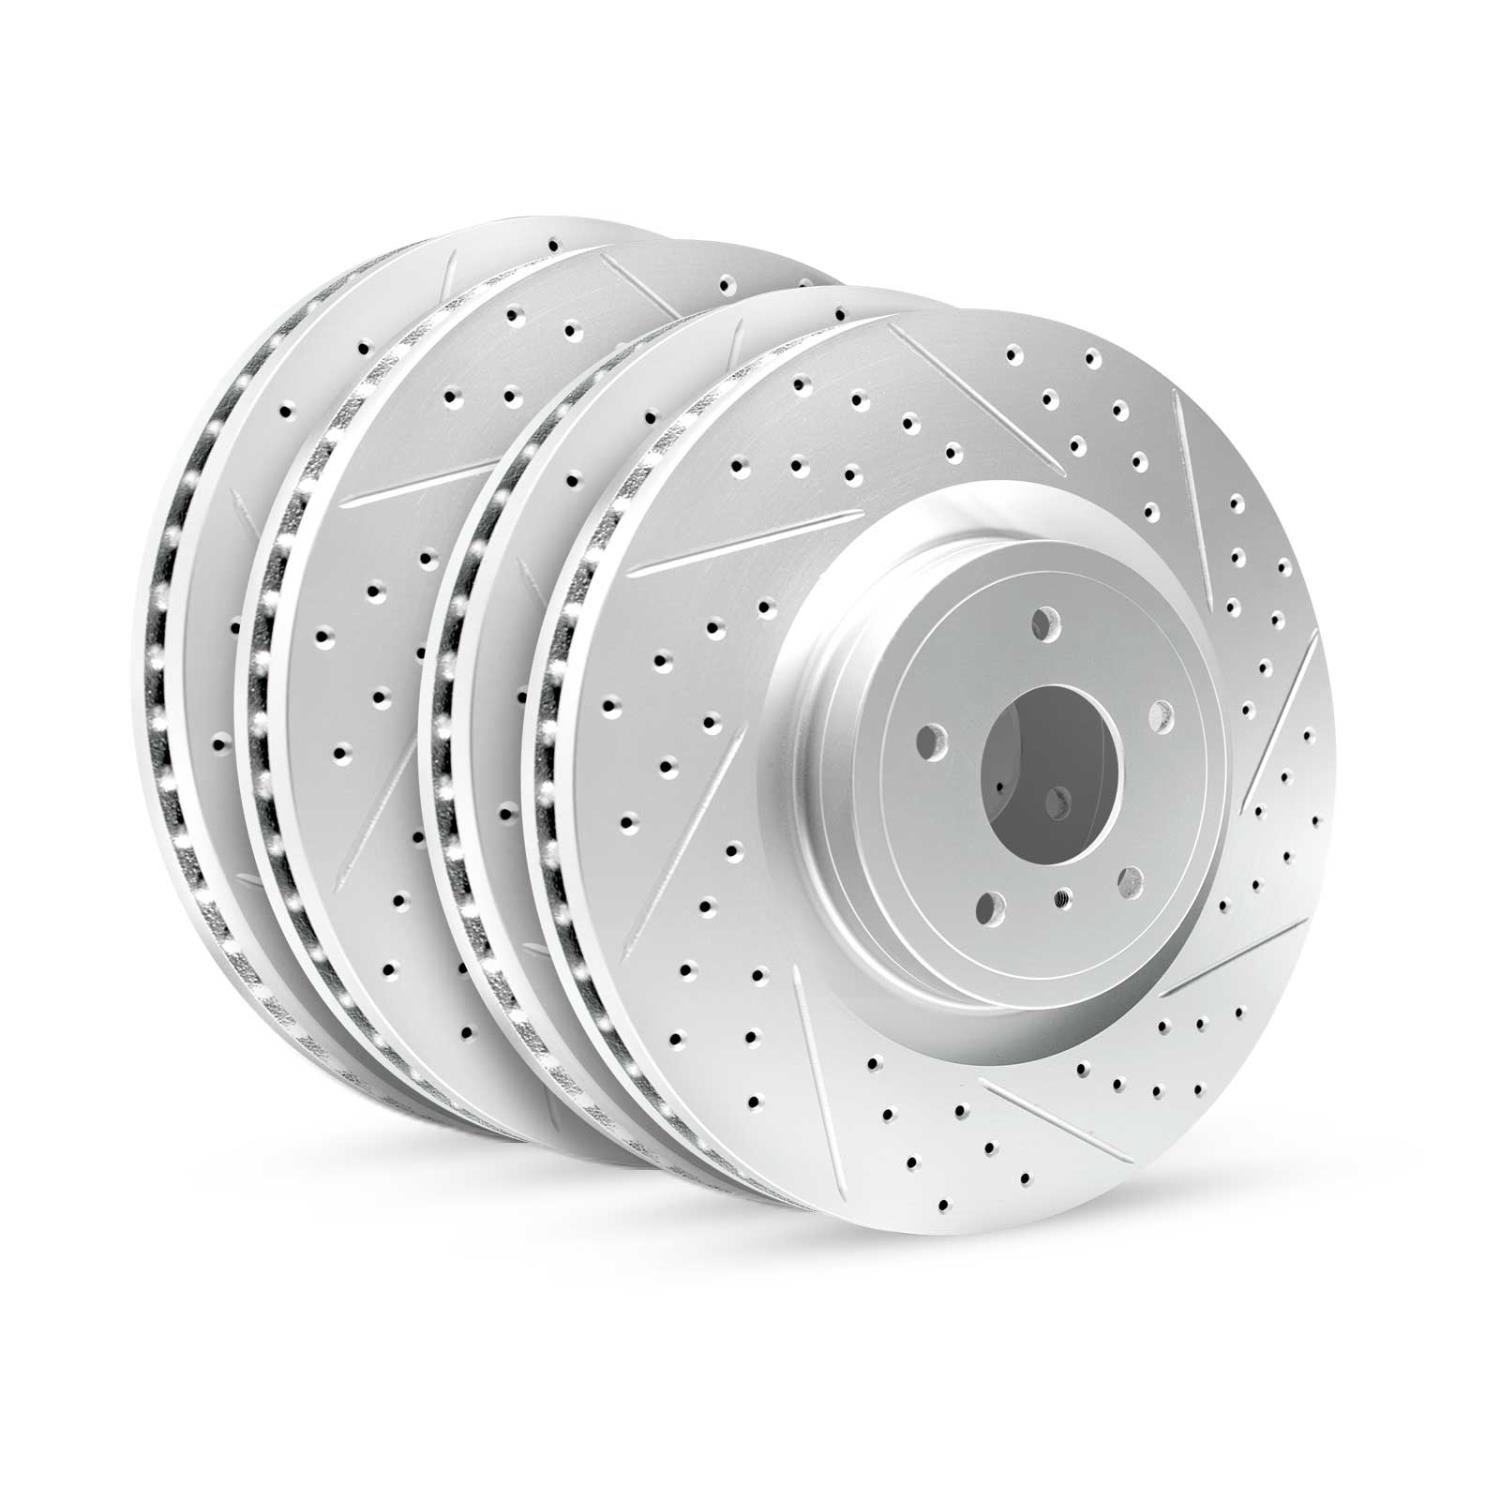 GEO-Carbon Drilled/Slotted Rotors, 2016-2016 Acura/Honda,